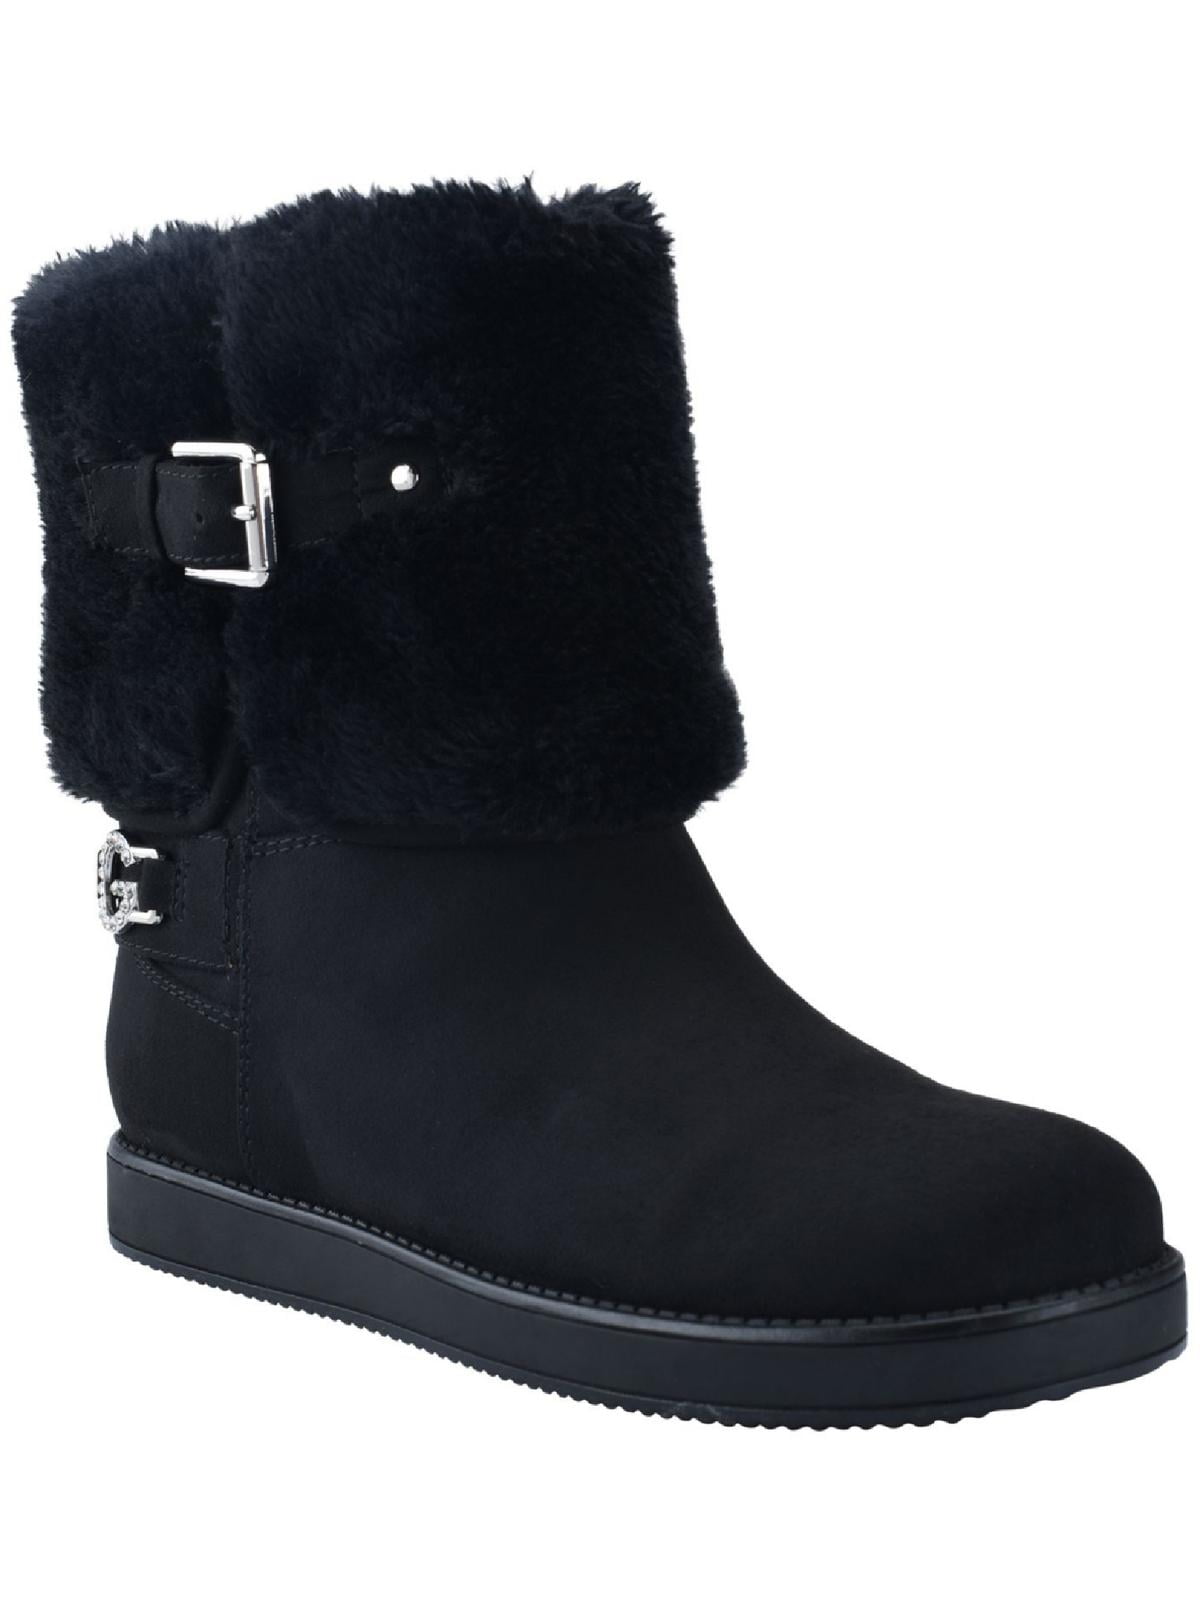 GBG Los Angeles Womens Aleya Faux Suede Cold Weather Ankle Boots ...